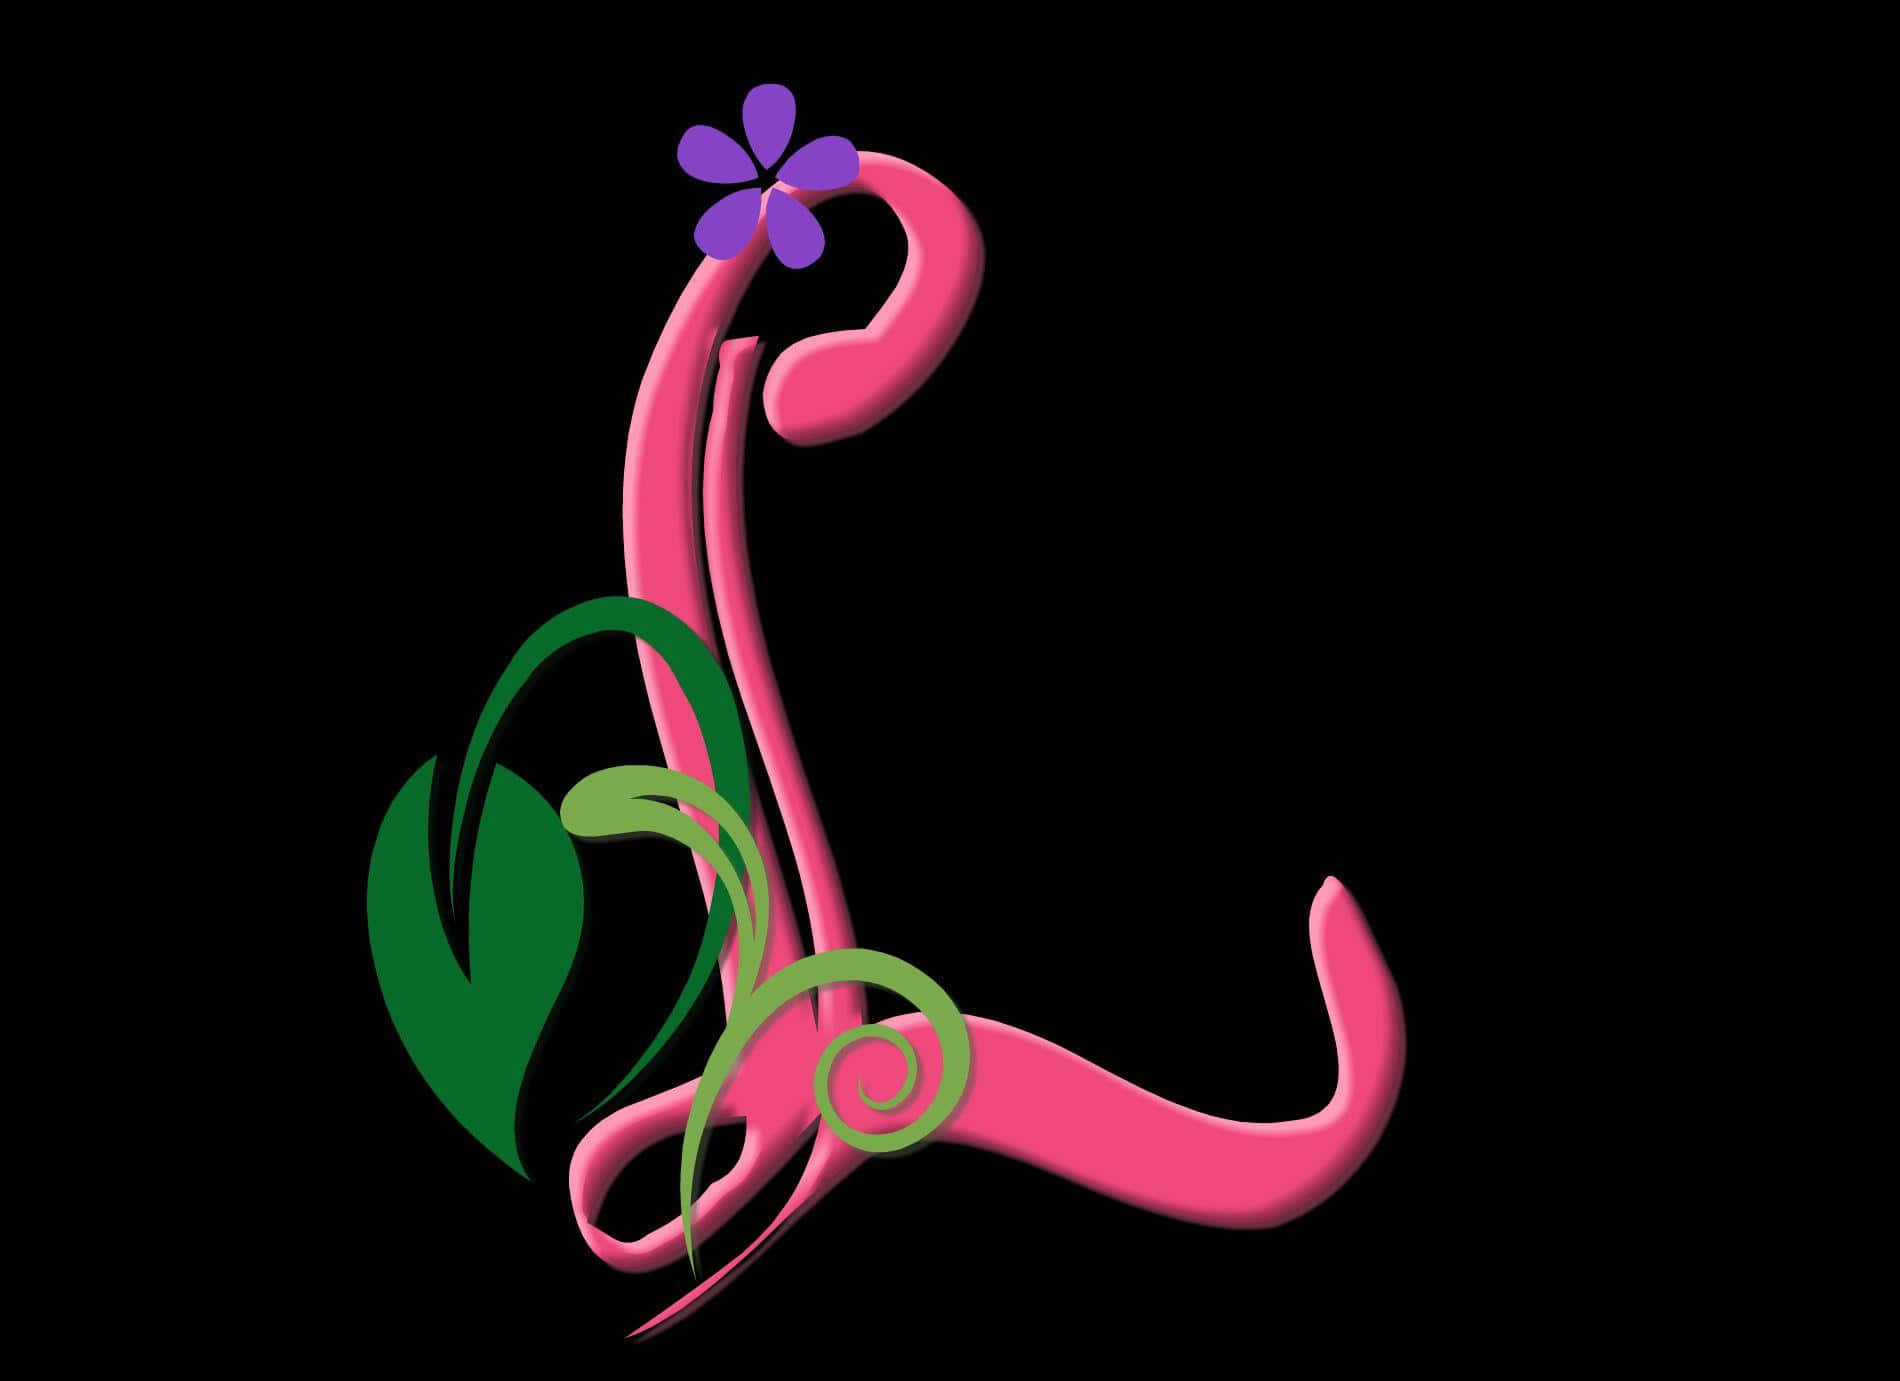 A Pink Flower And Leaves With A Letter L